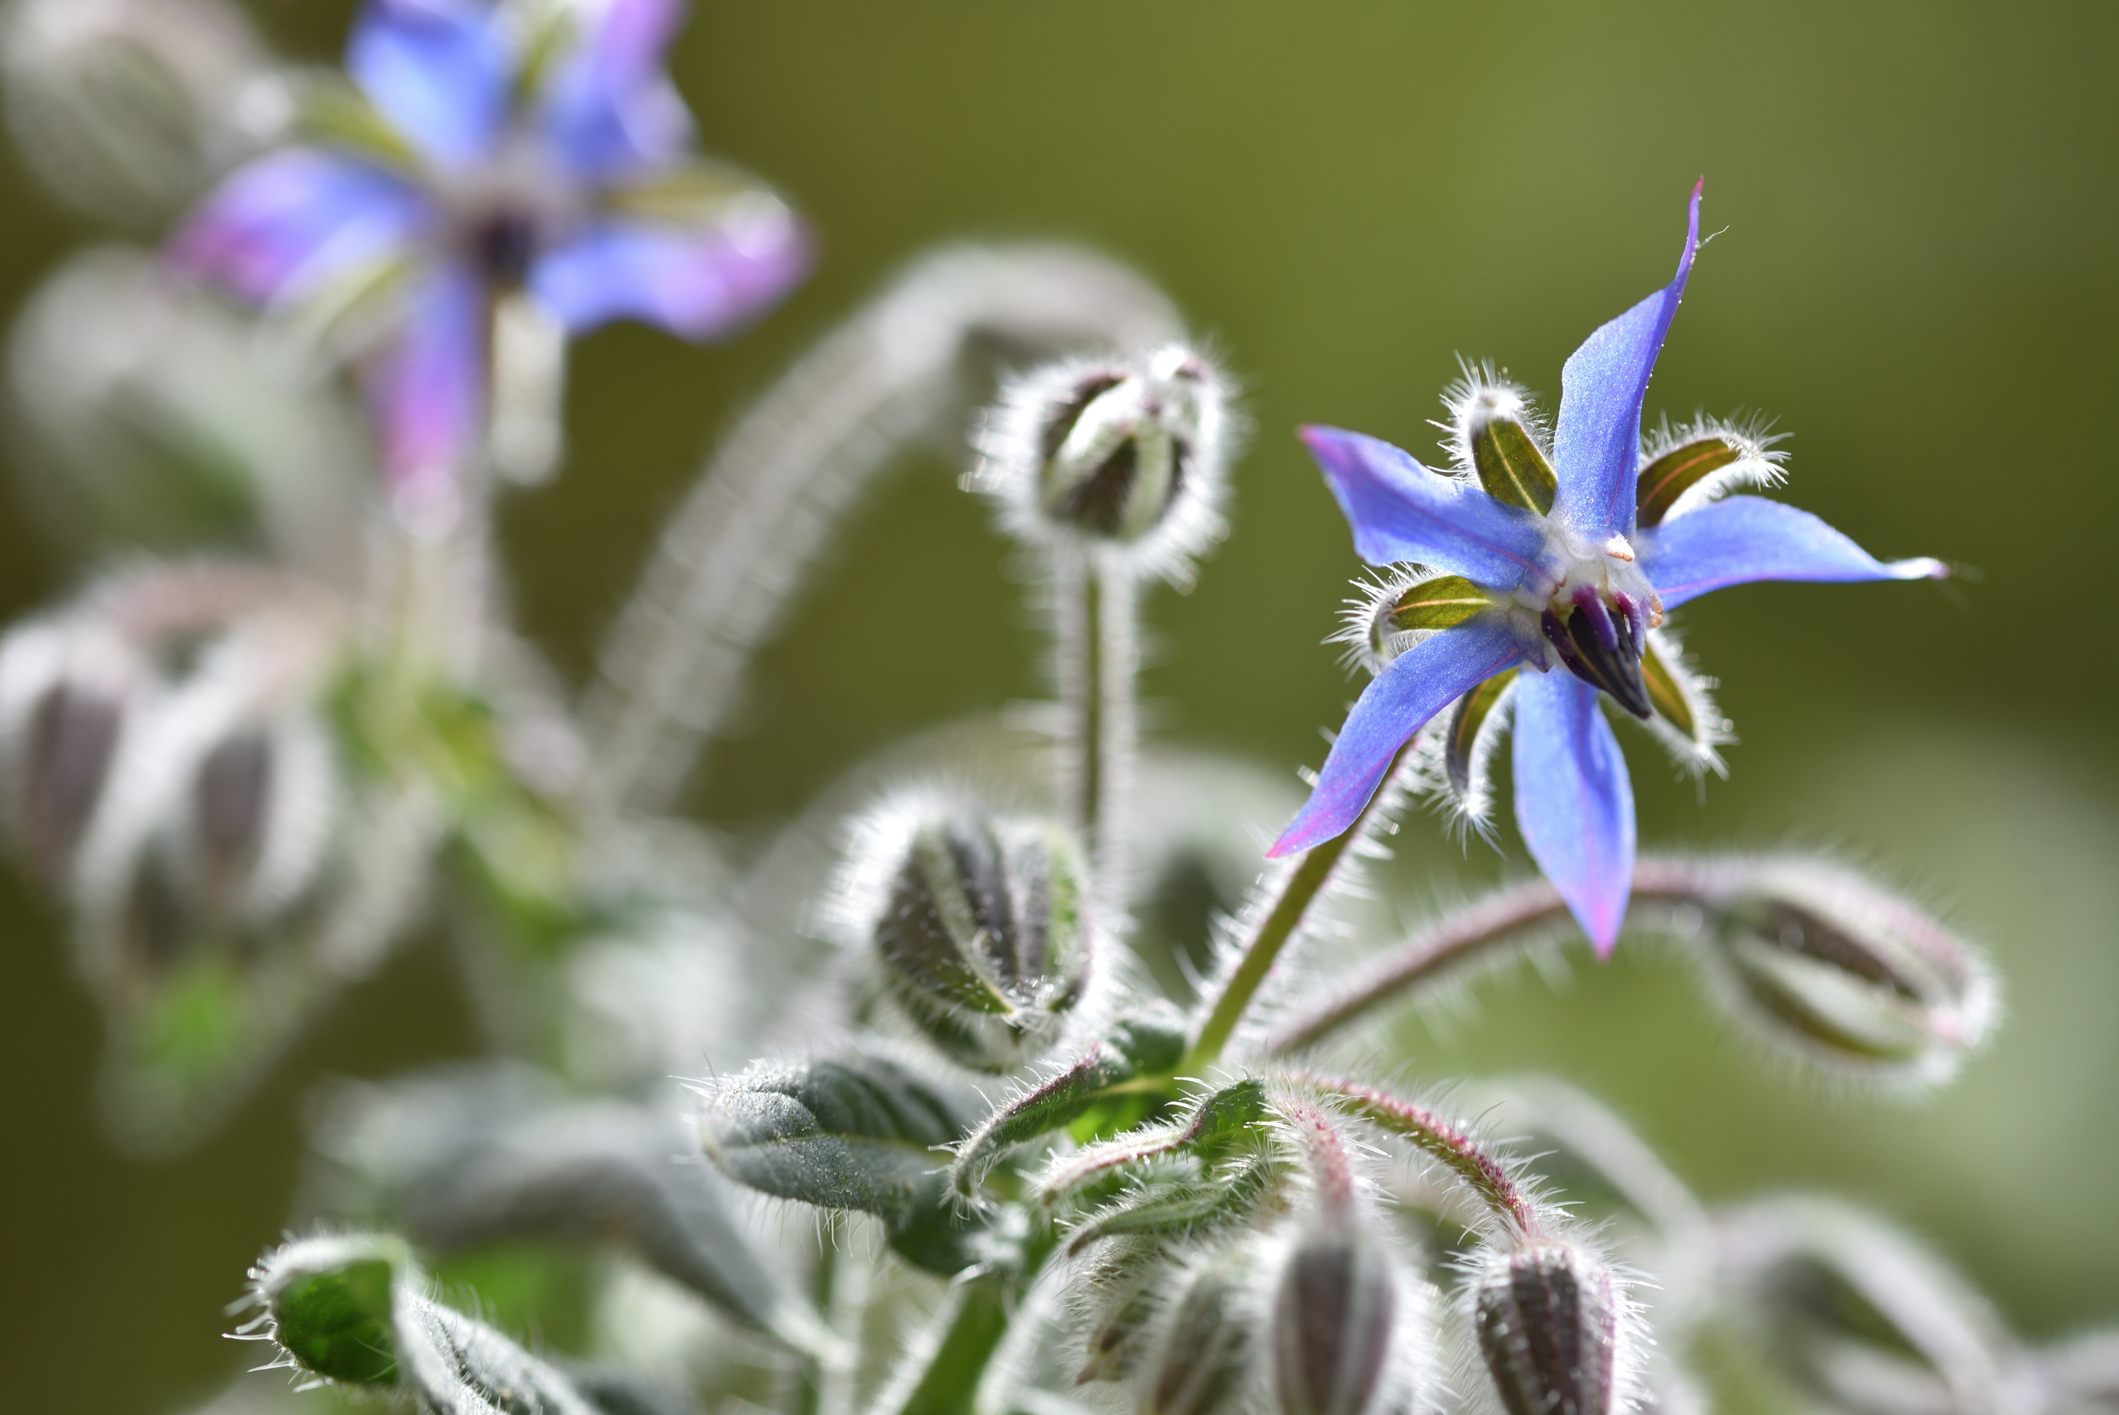 A close-up of a blue borage flower and its fuzzy foliage.
